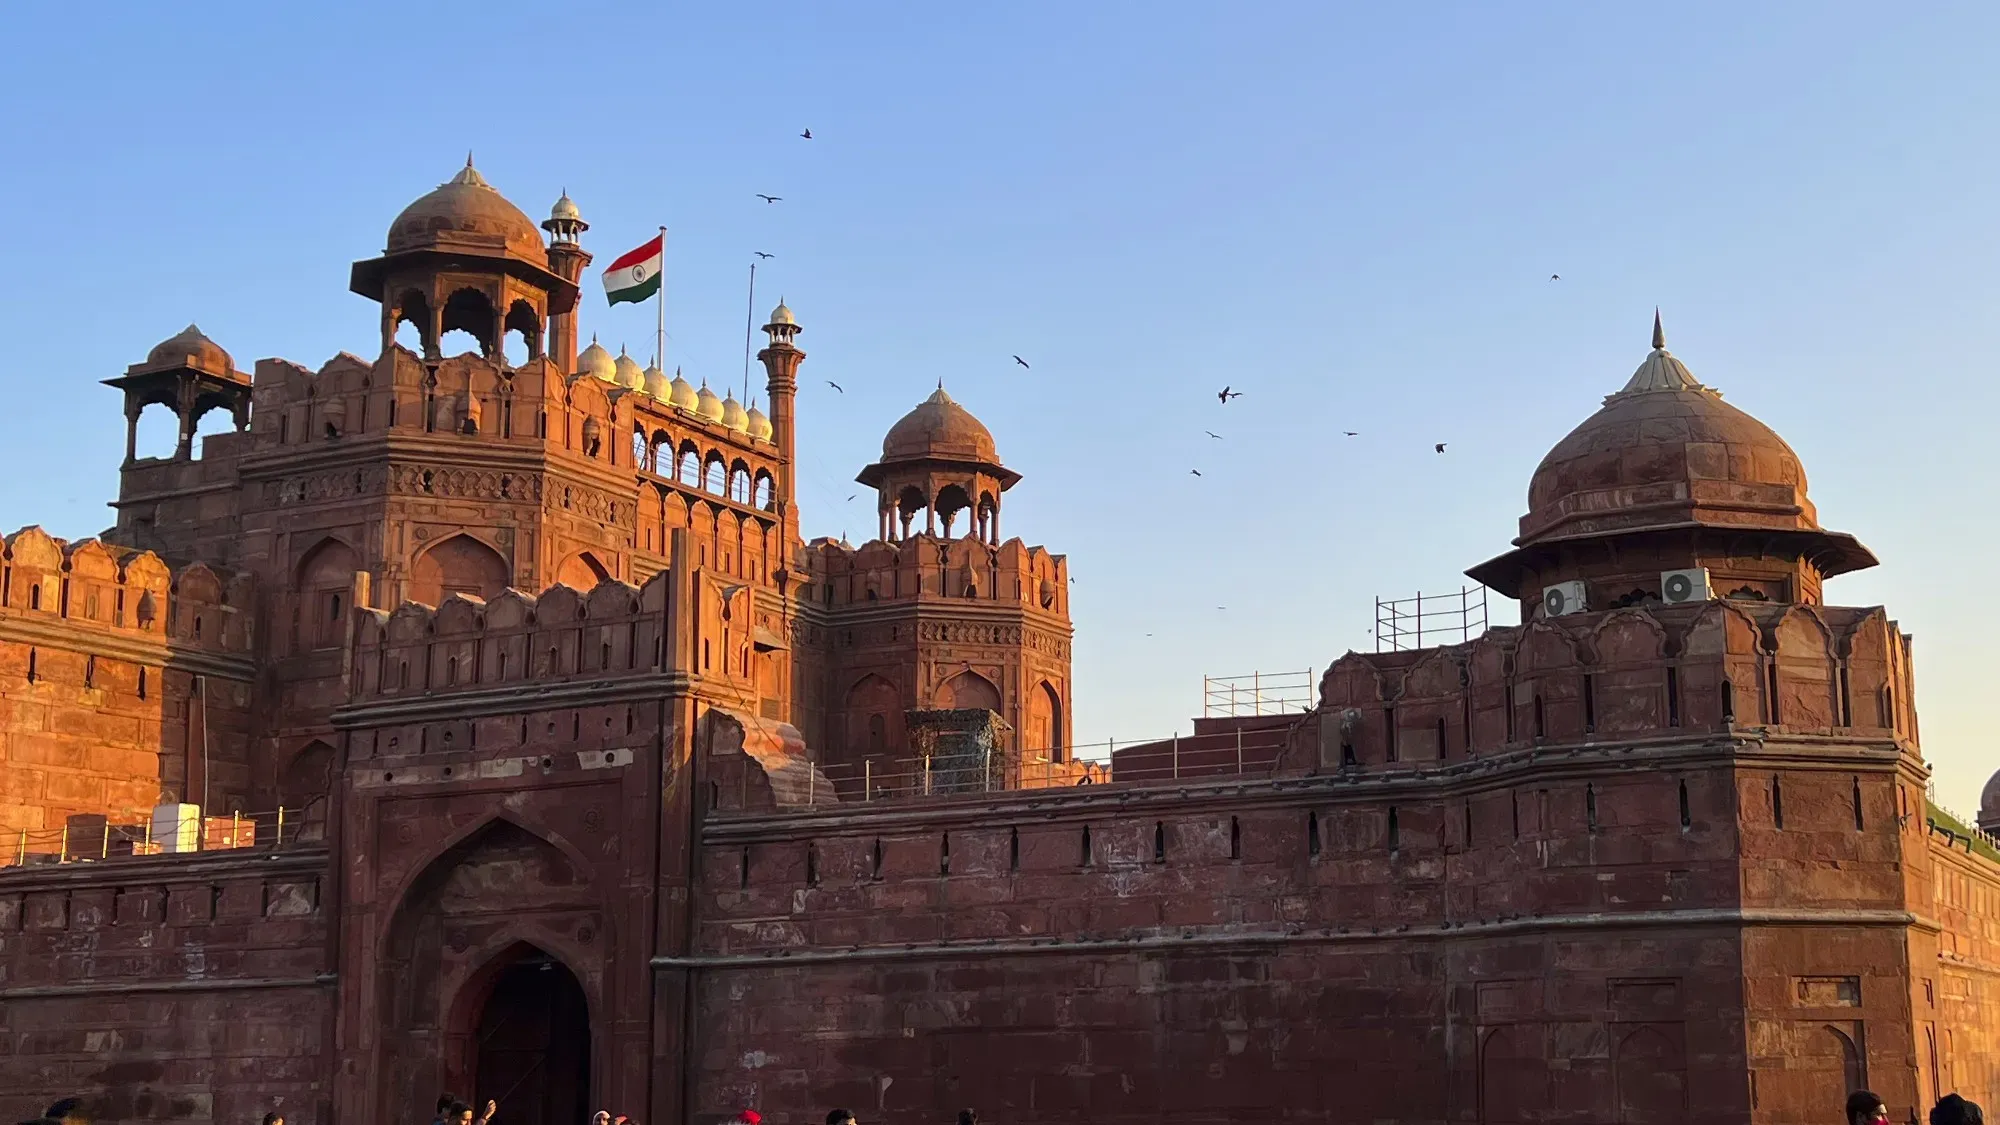 The Red Fort in Delhi with birds flying over it